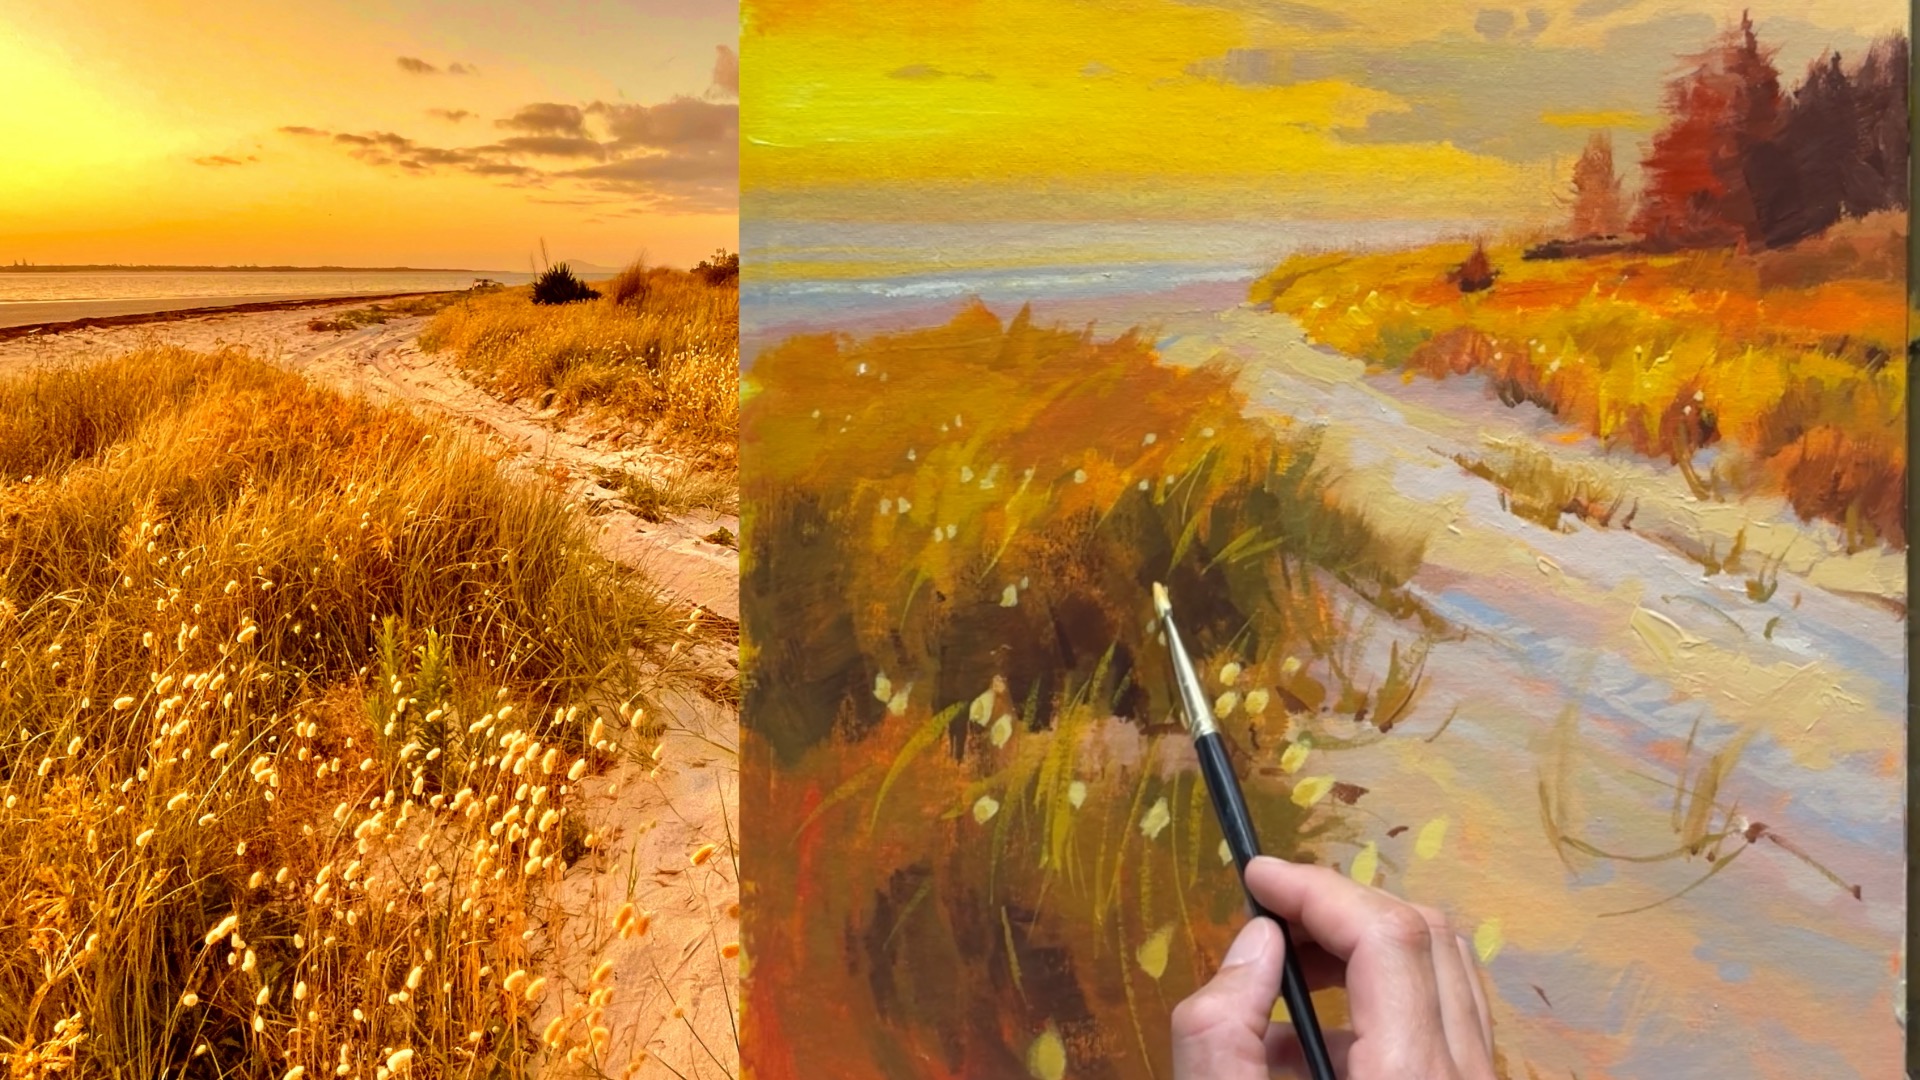 Painting Critiques for the Walk to the Beach Workshop